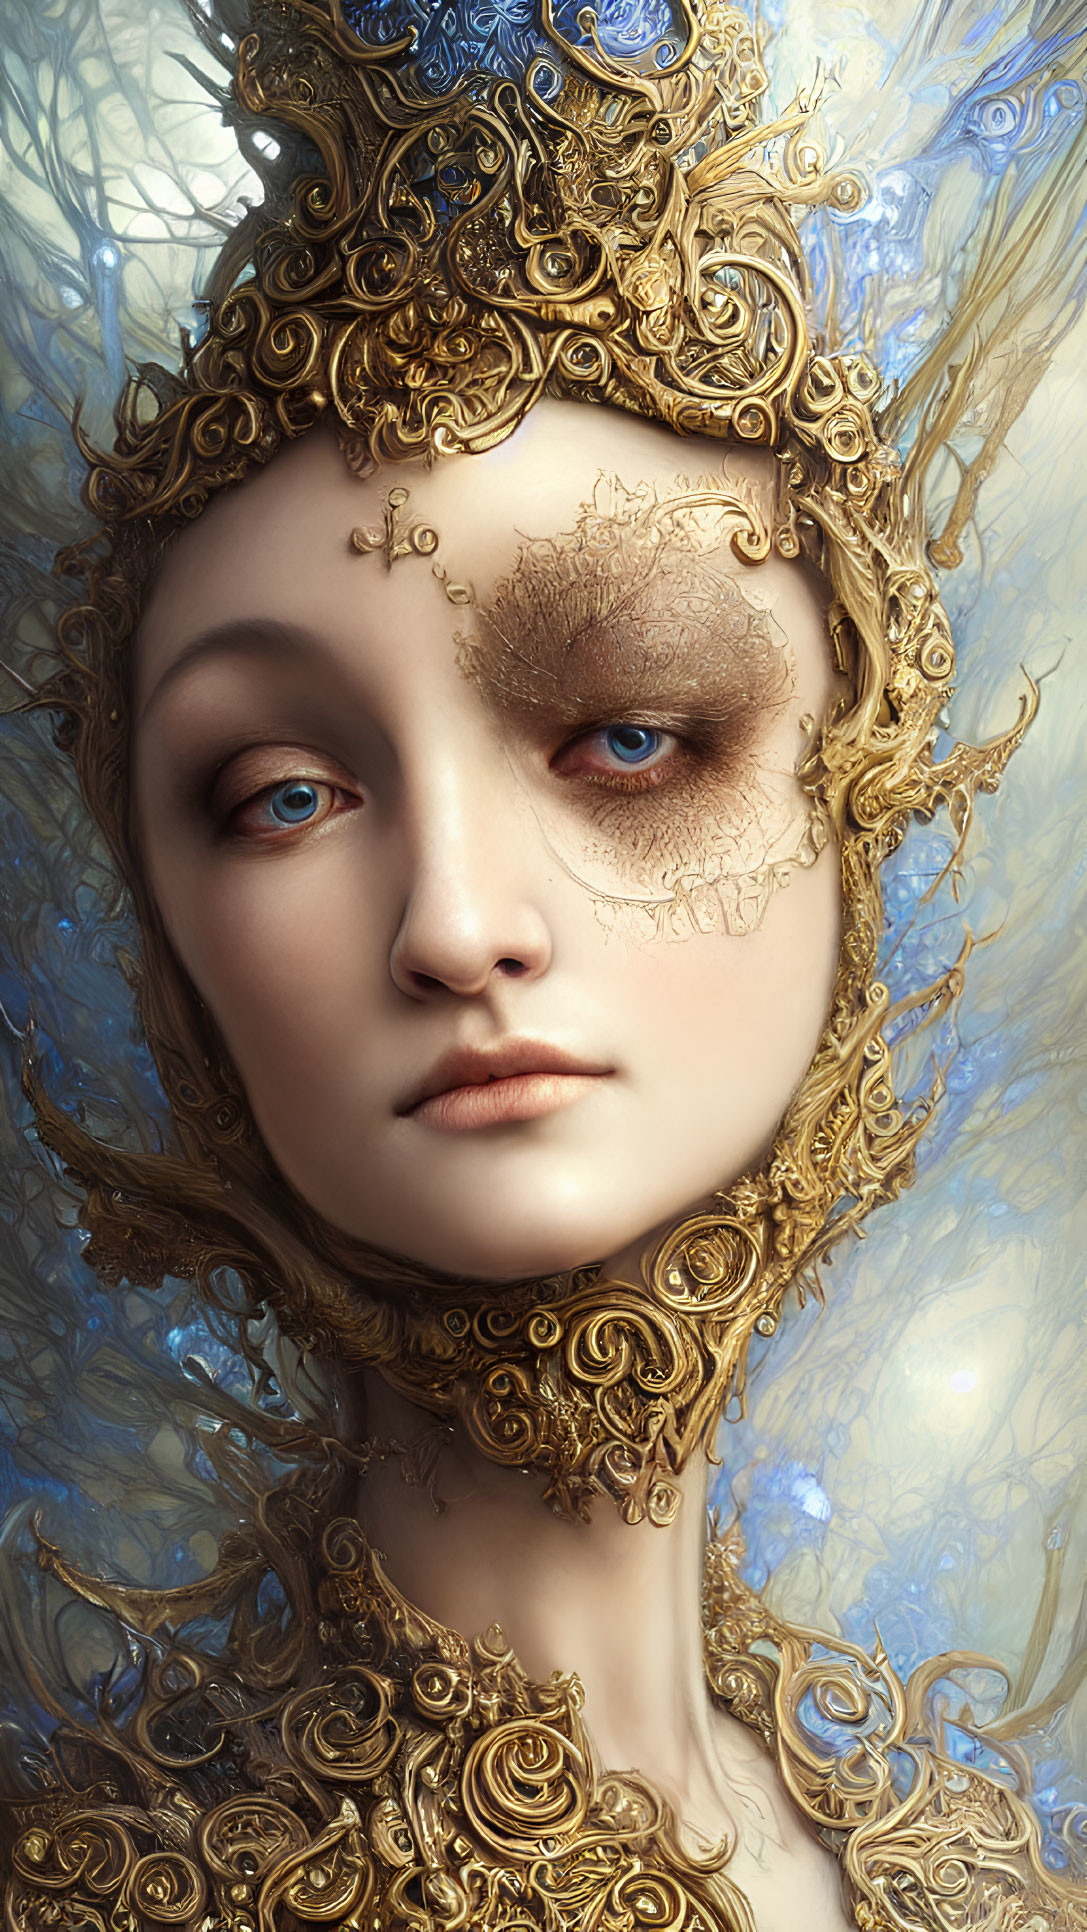 Portrait of woman with ornate gold headwear and intricate eye detailing on soft blue background